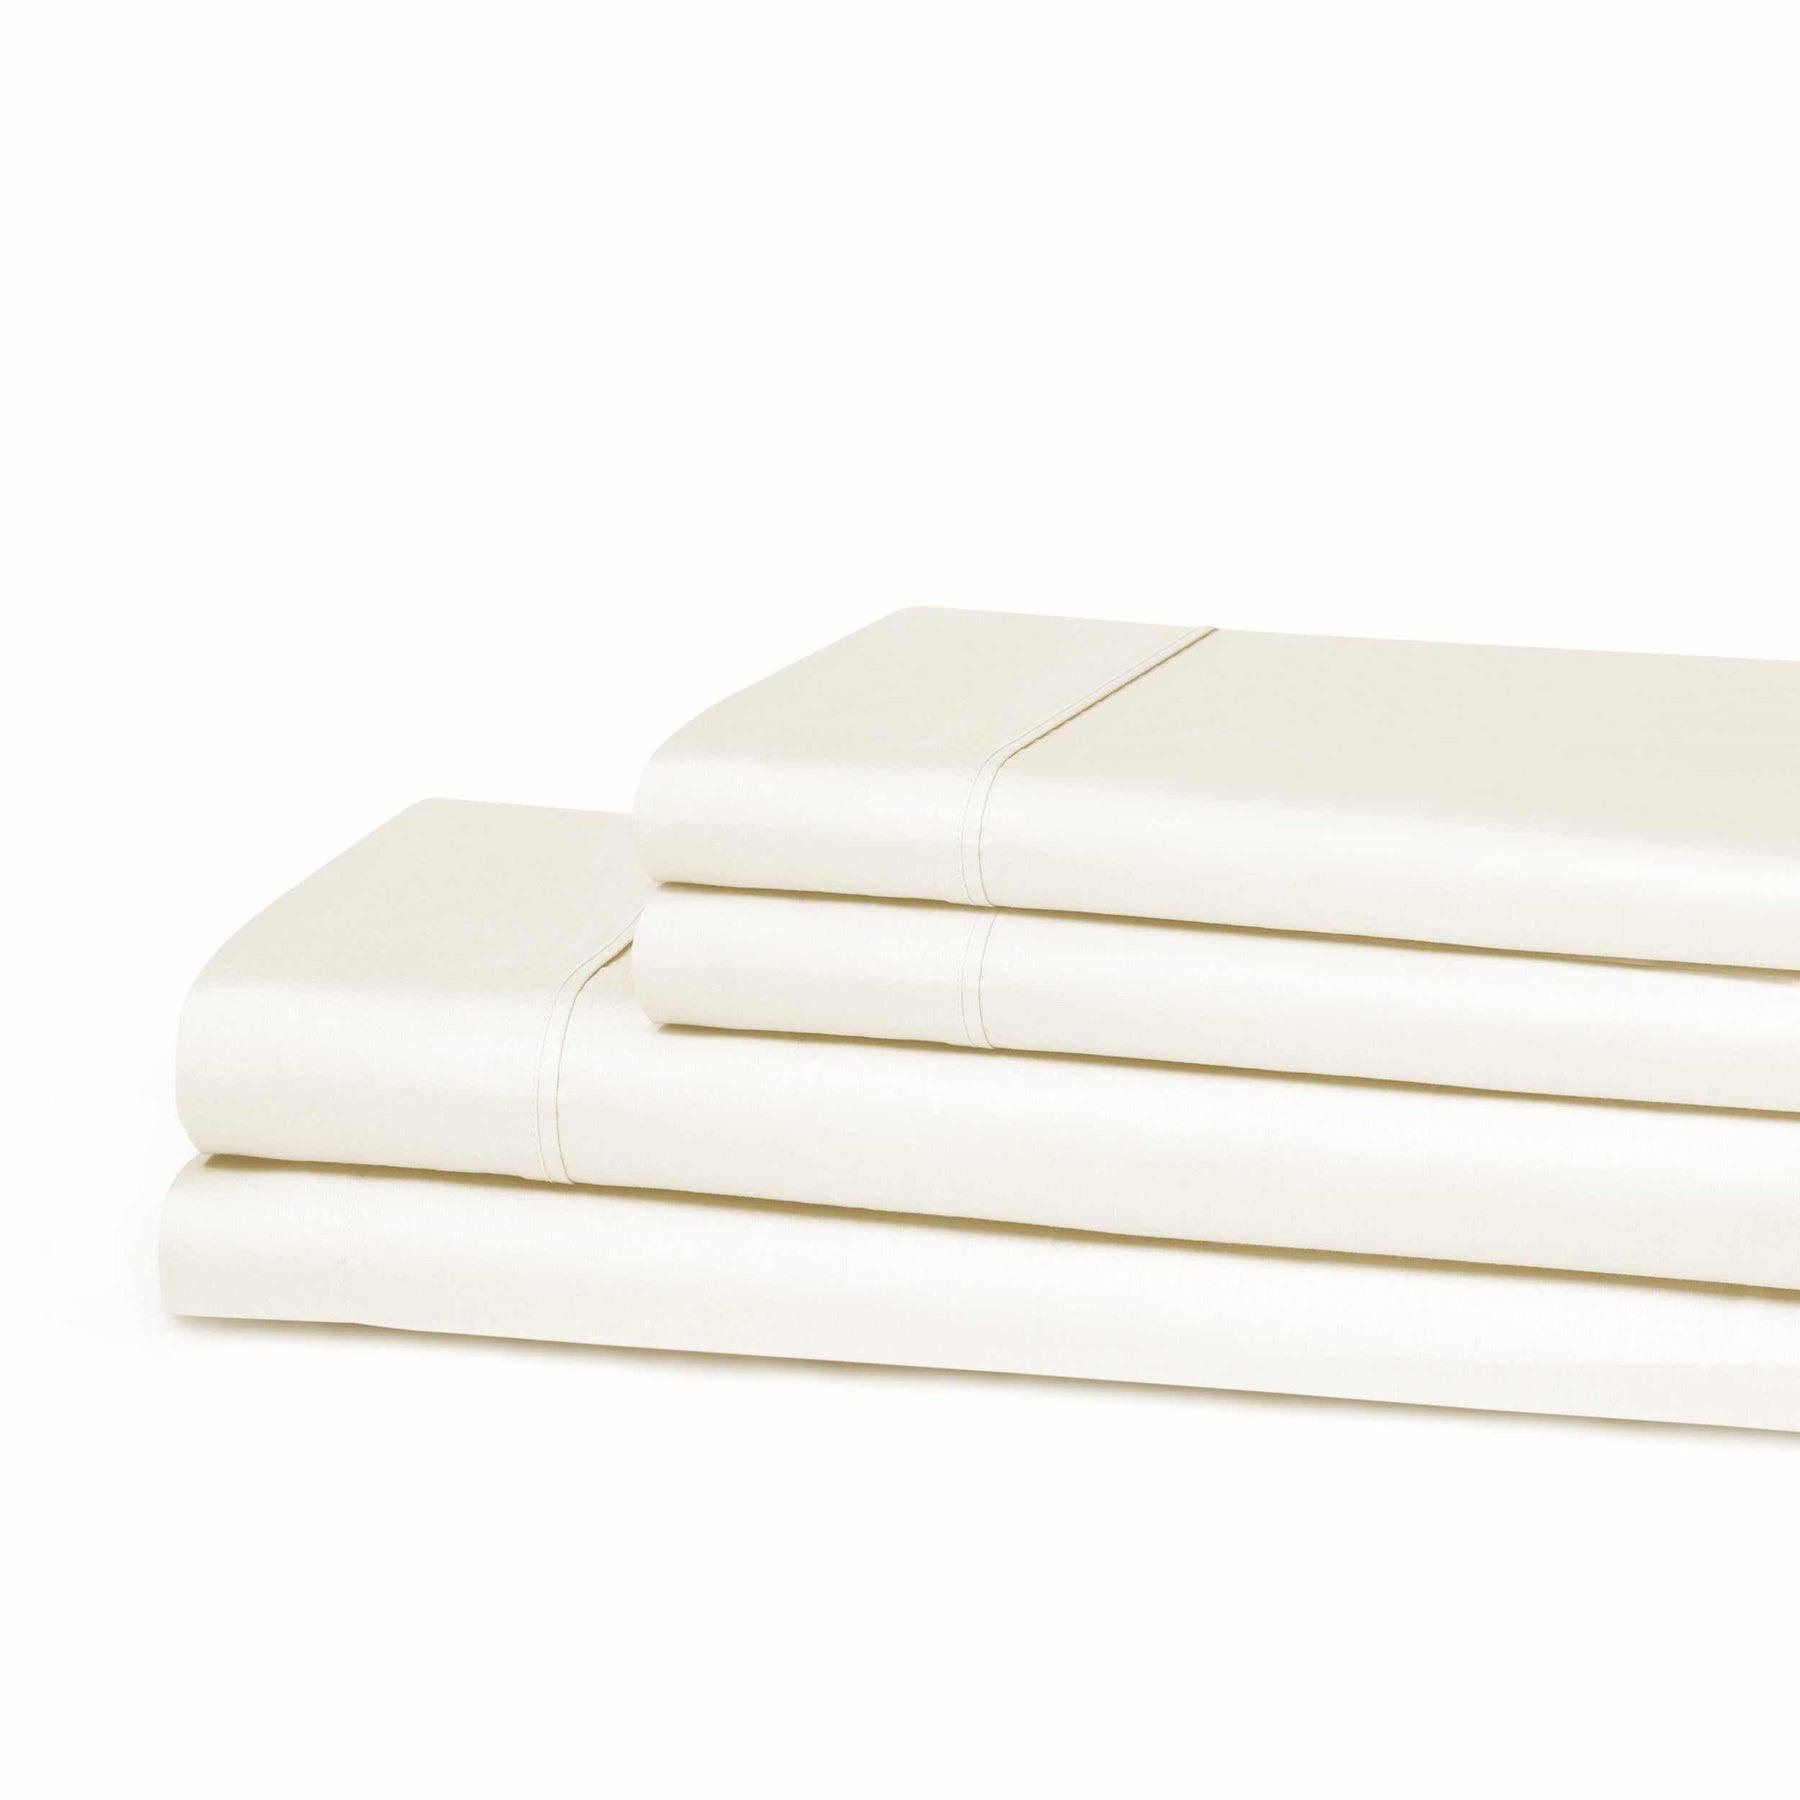 Superior 300 Thread Count Cotton Breathable Deep Pocket Solid Bed Sheet Set - Ivory